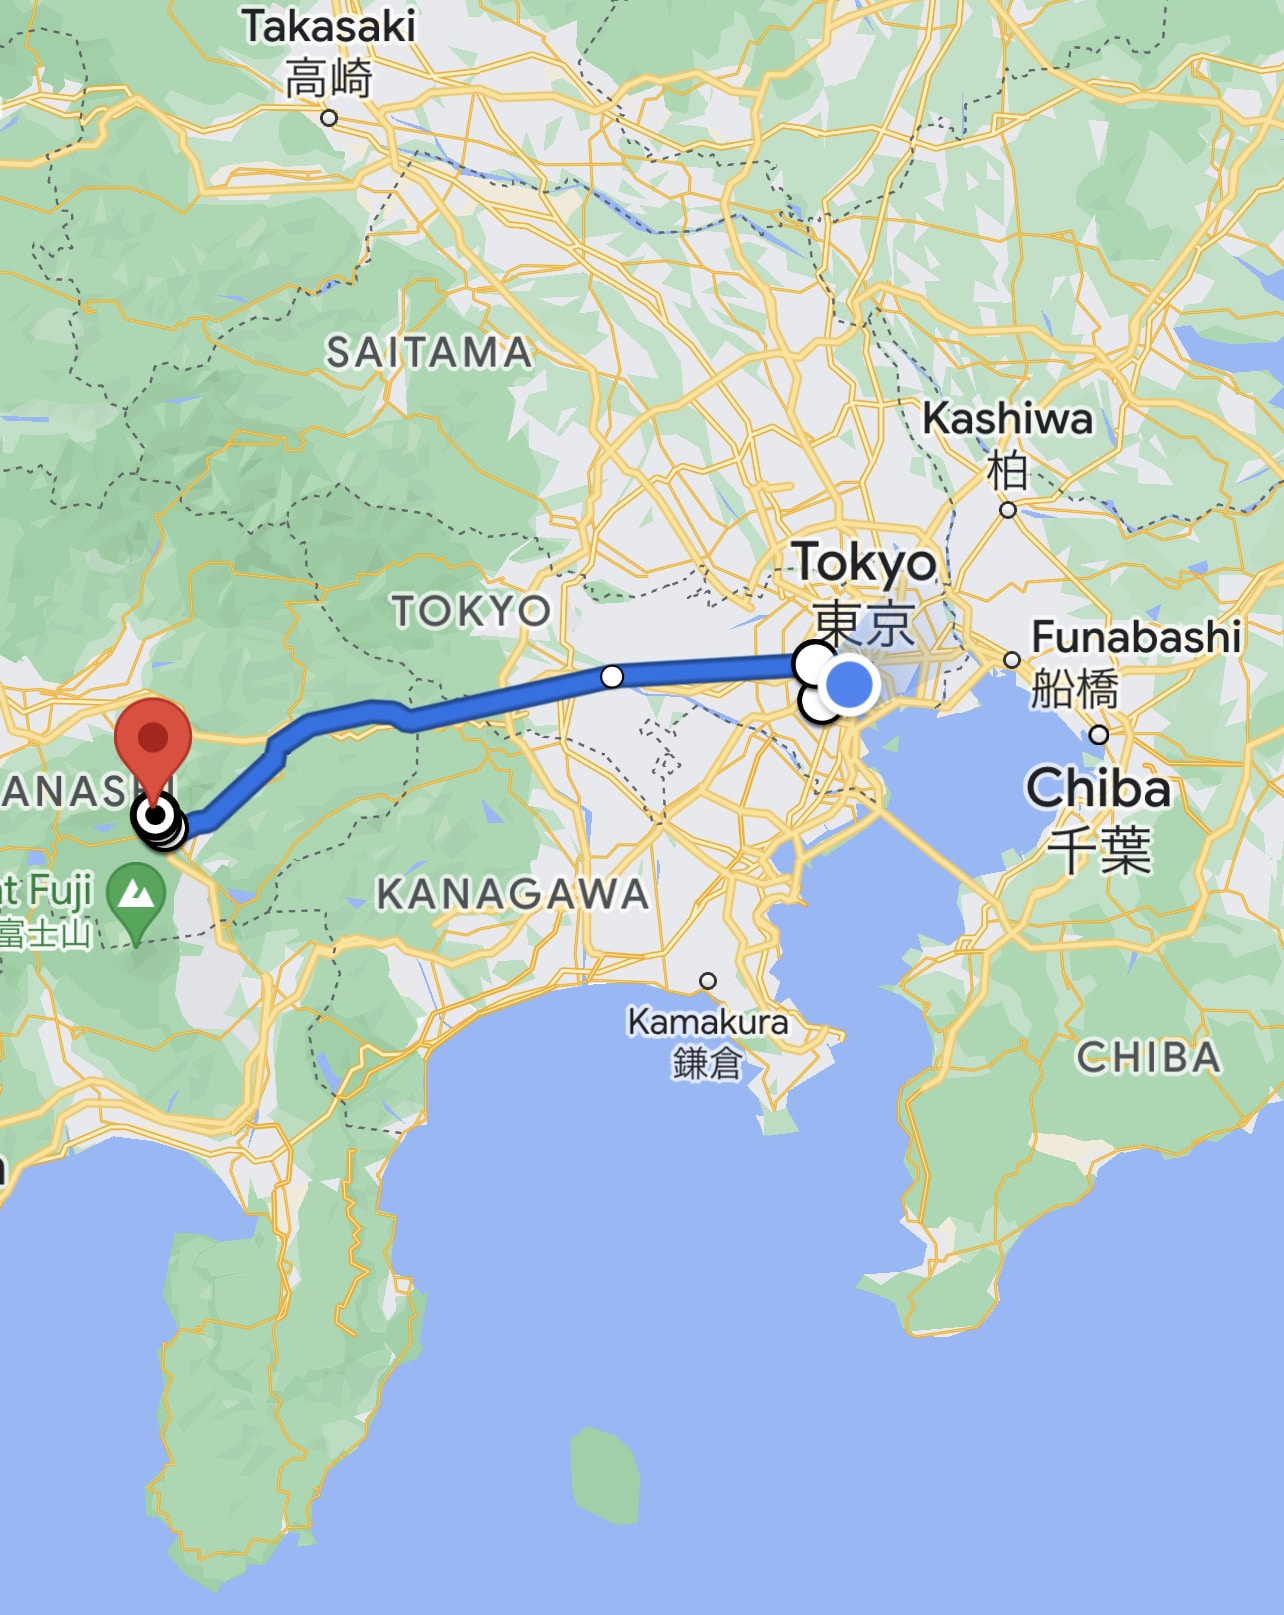 Is Google Maps accurate in Japan?